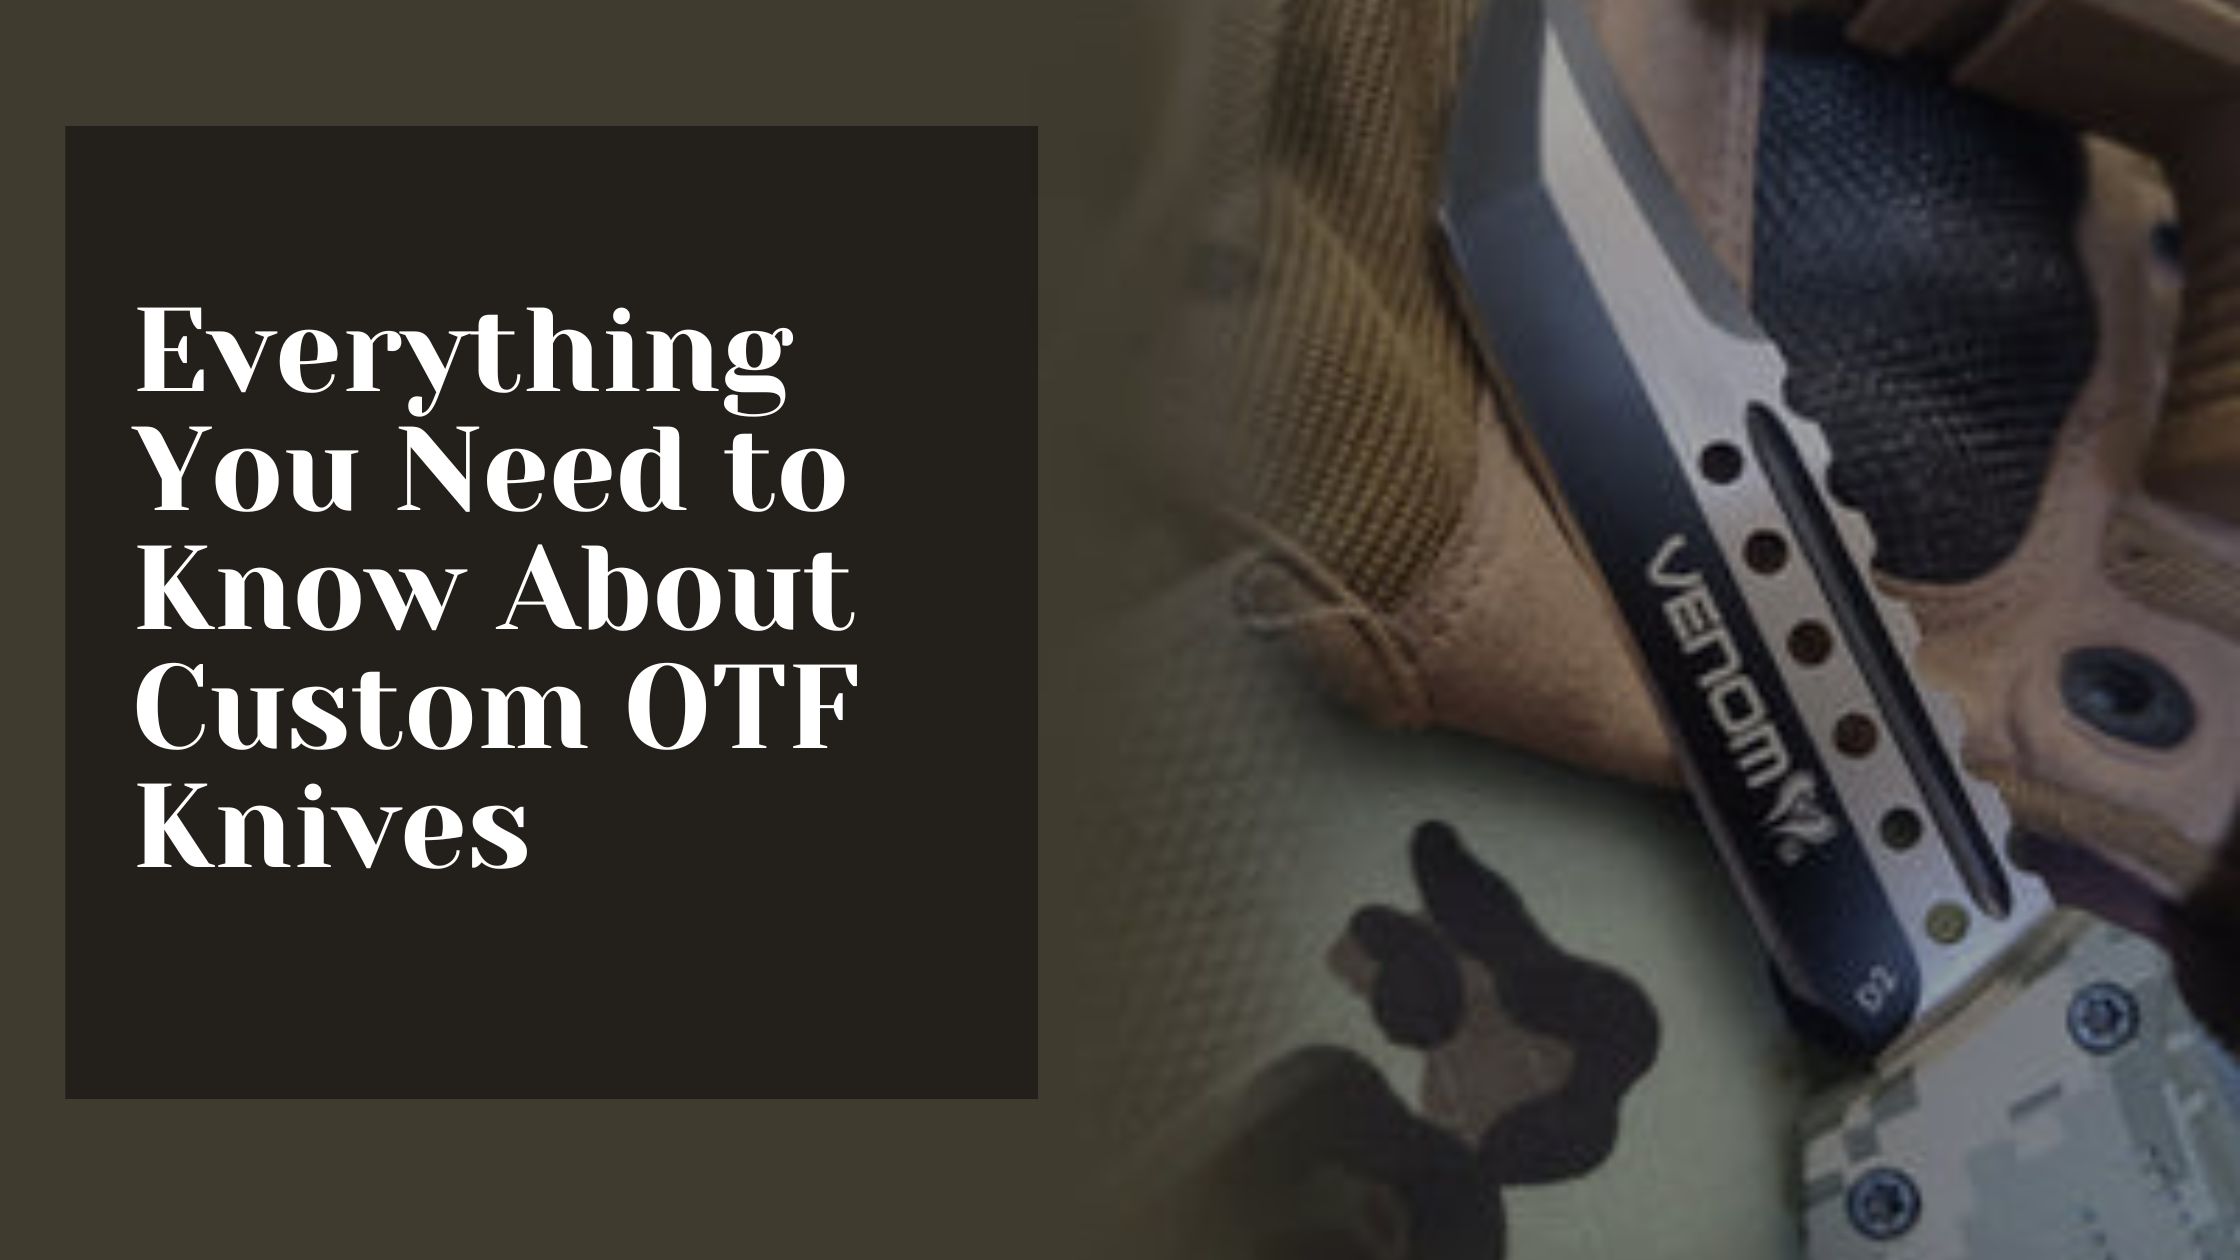 Everything You Need to Know About Custom OTF Knives